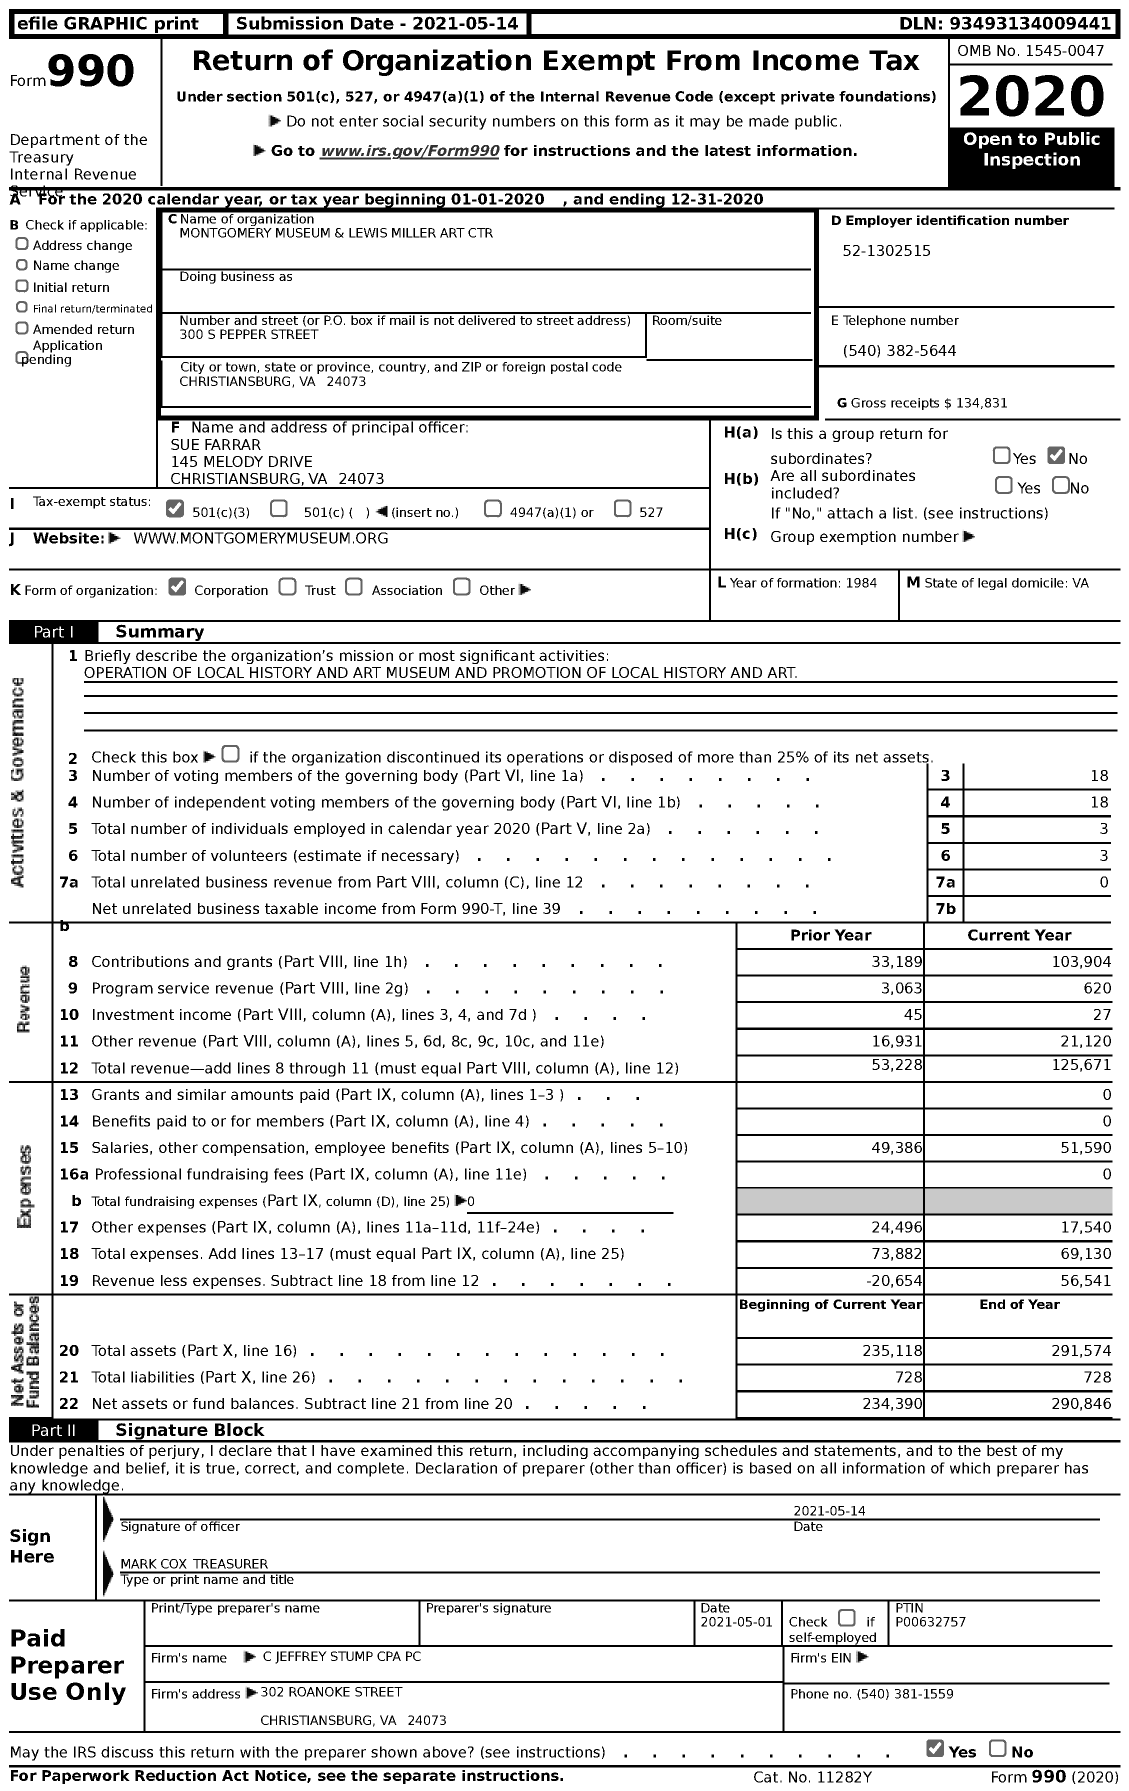 Image of first page of 2020 Form 990 for Montgomery Museum and Lewis Miller Art Center